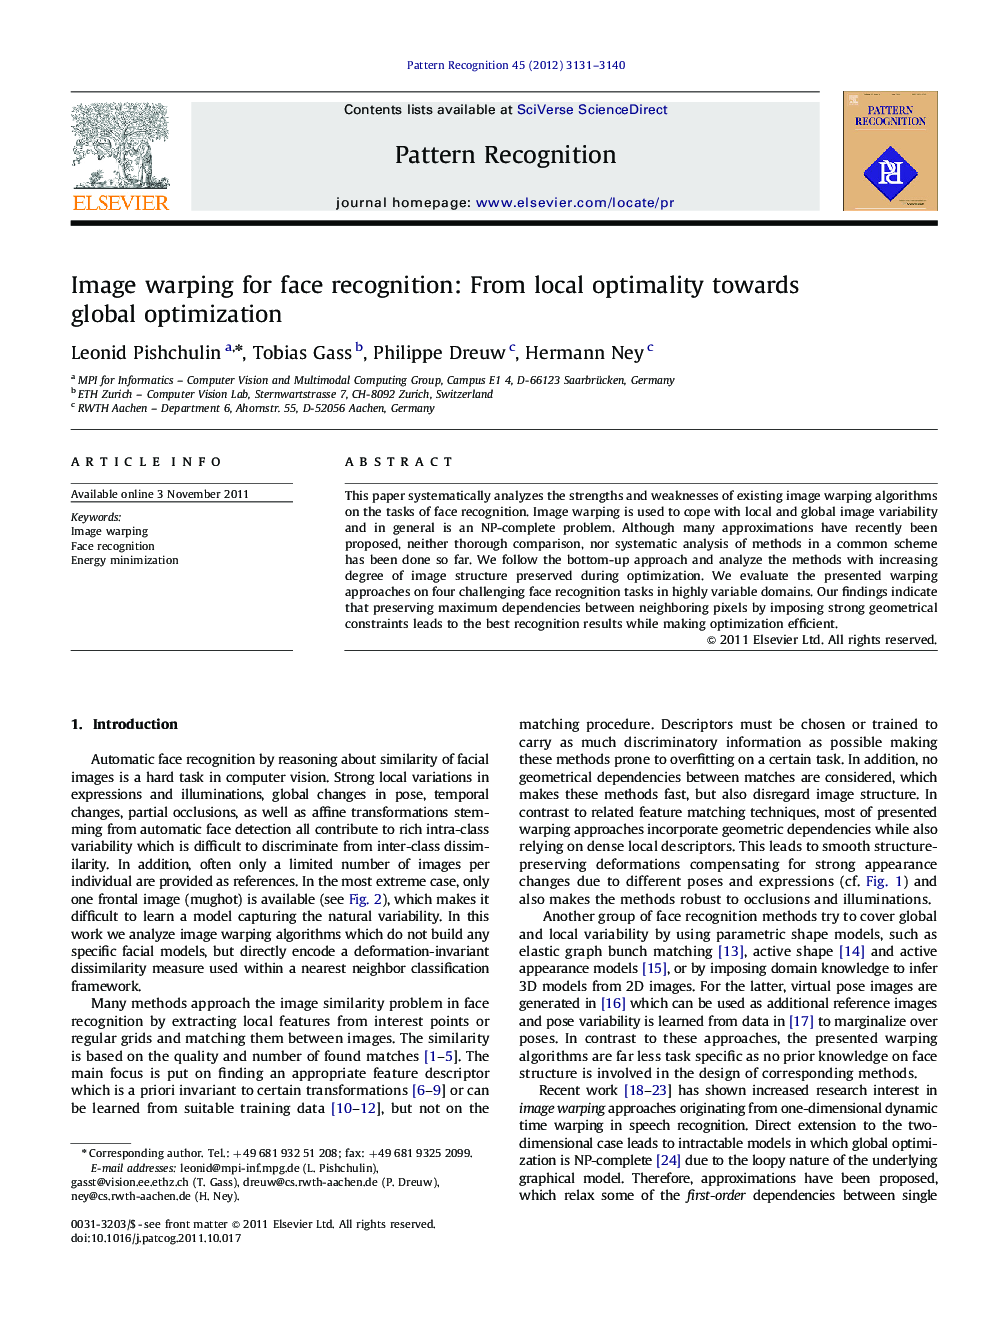 Image warping for face recognition: From local optimality towards global optimization